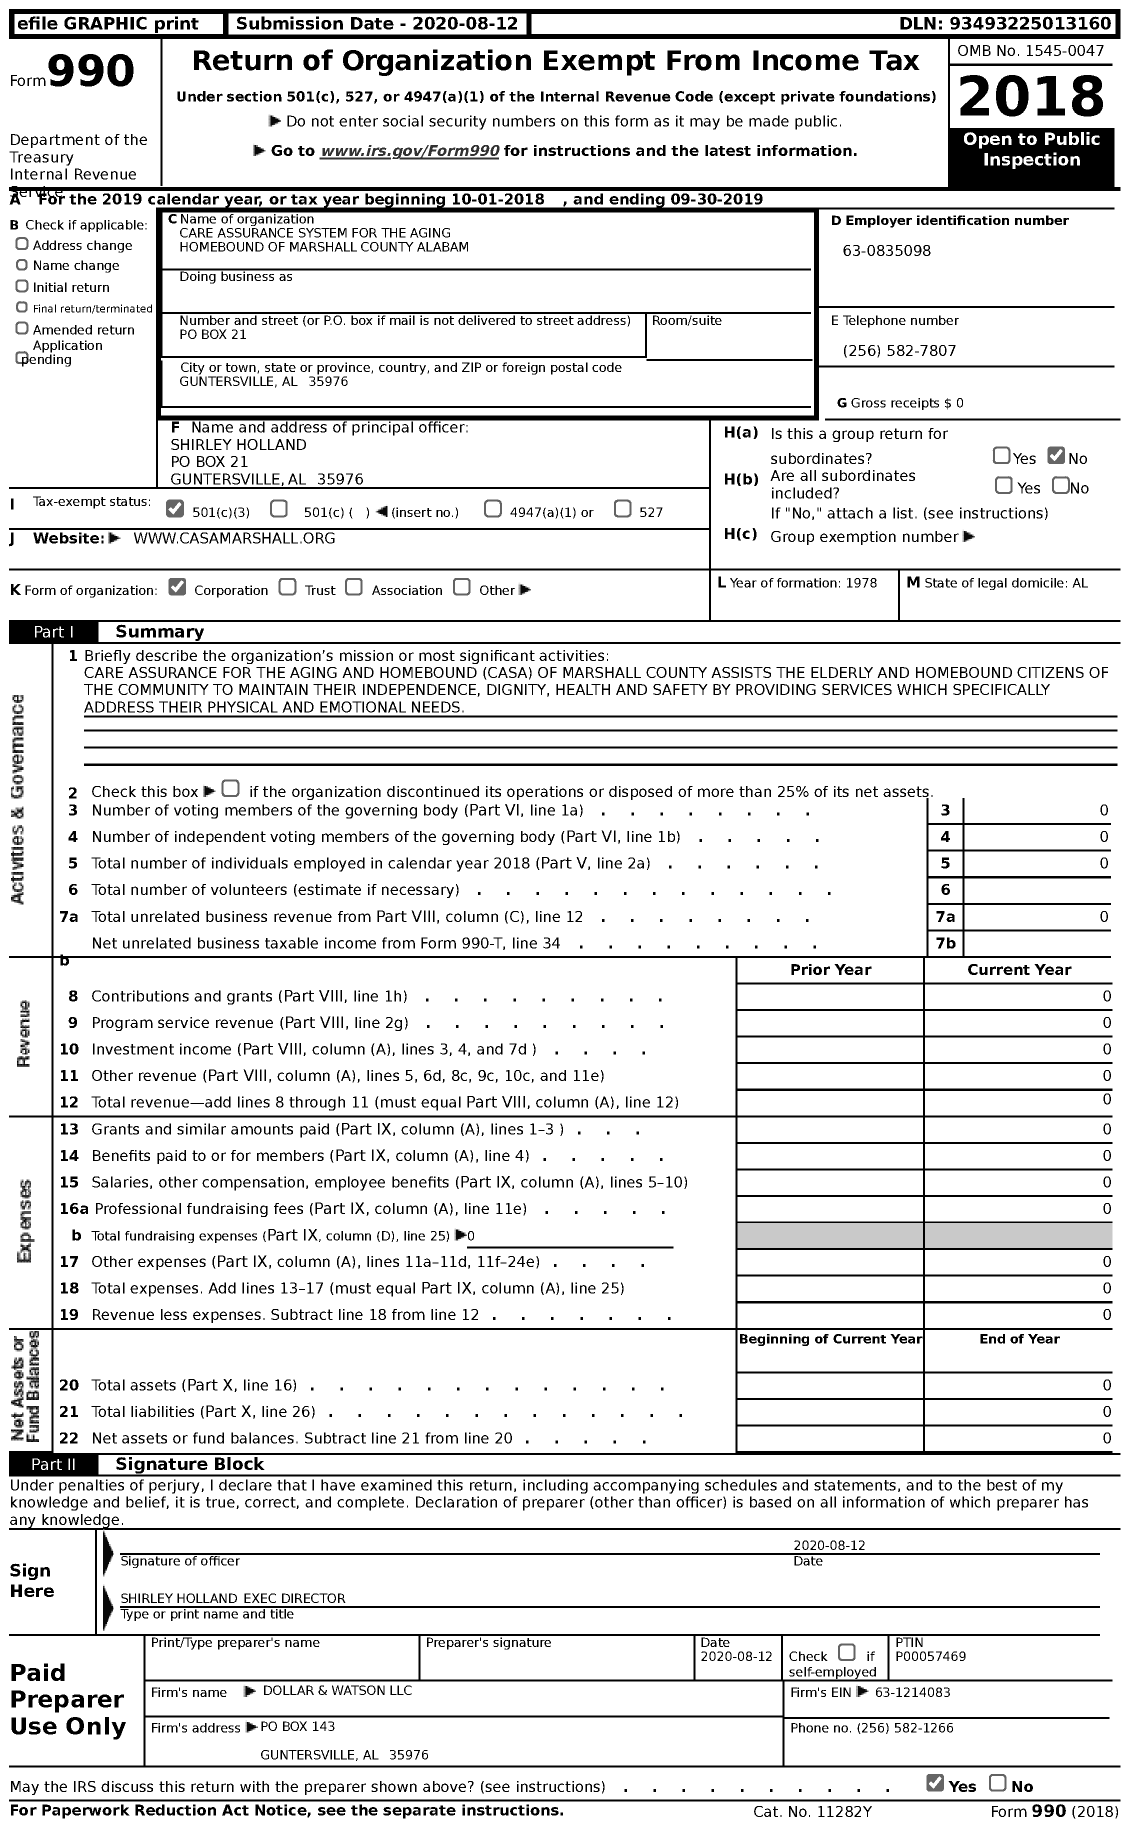 Image of first page of 2018 Form 990 for Care Assurance System for the Aging Homebound of Marshall County Alabama